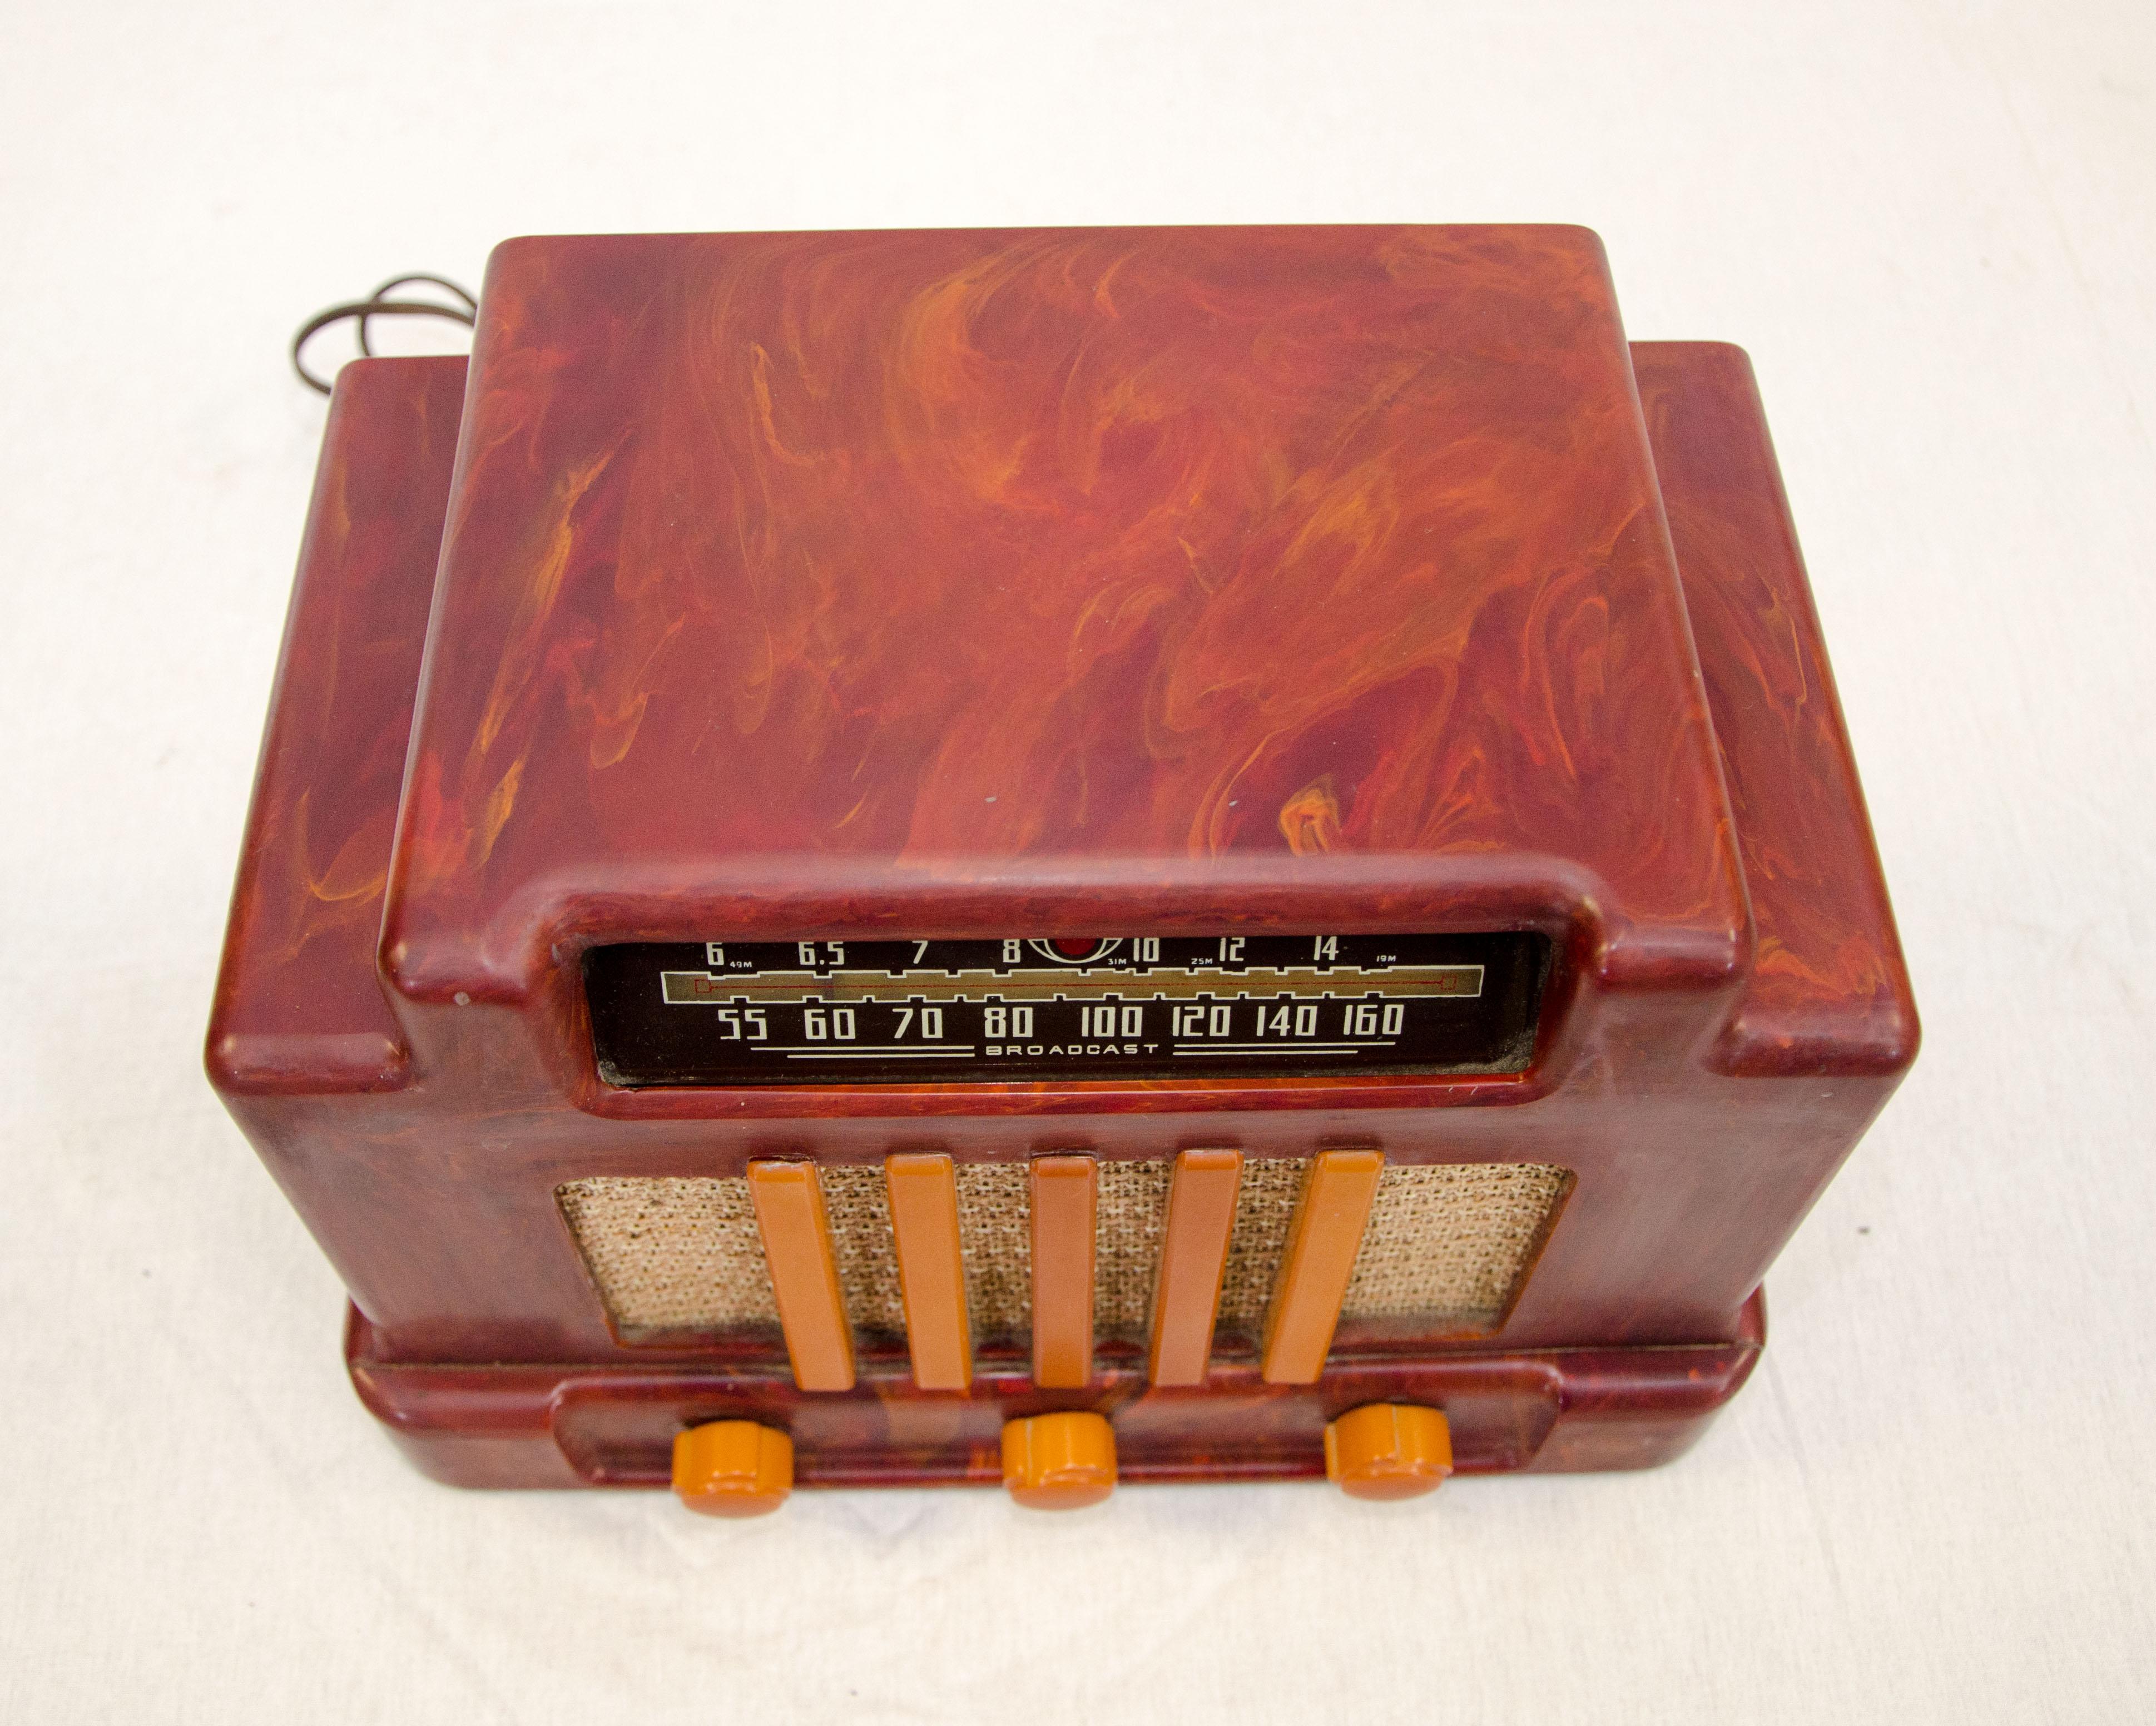 Beautiful vintage mottled red and butterscotch colored Catalin radio. It was manufactured by Addison Industries in Canada. Sometimes referred to as the 